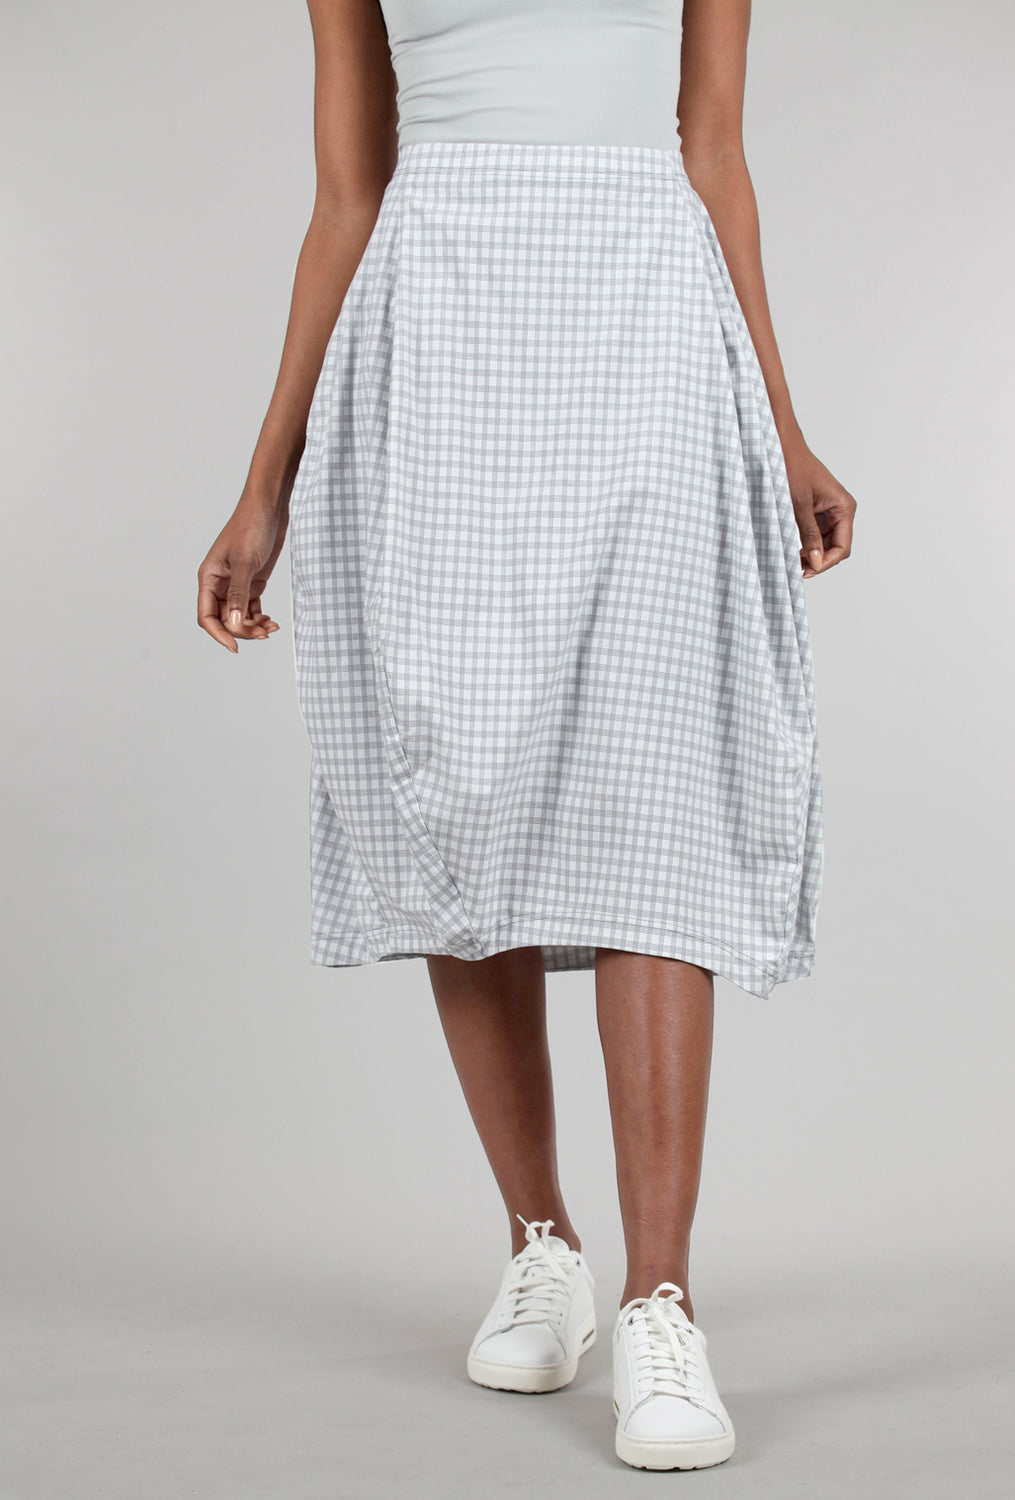 Rundholz Sig Stretch Full Skirt, Water Check 